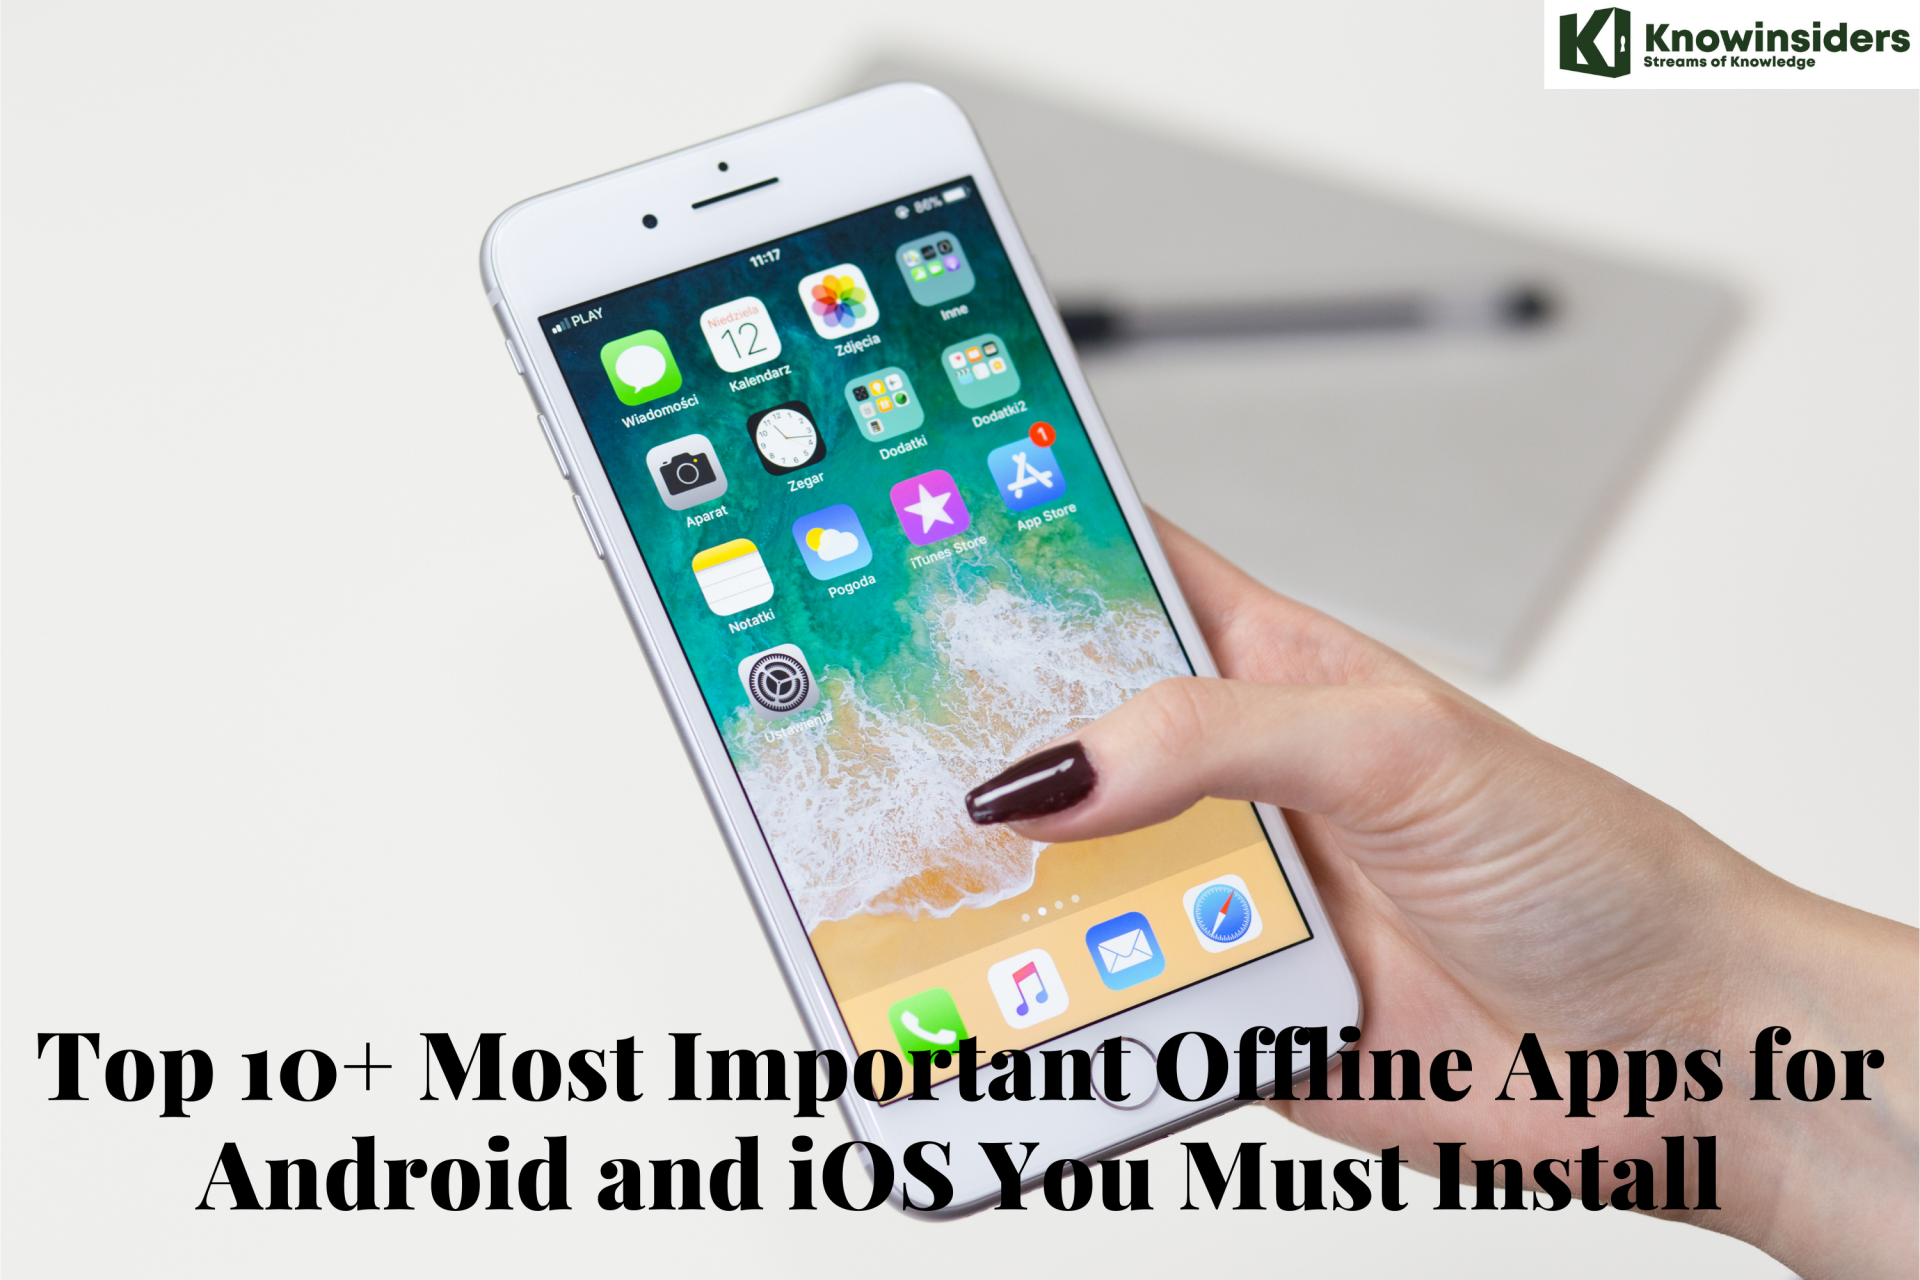 Top 10+ Most Important Offline Apps for Android and iOS You Must Install